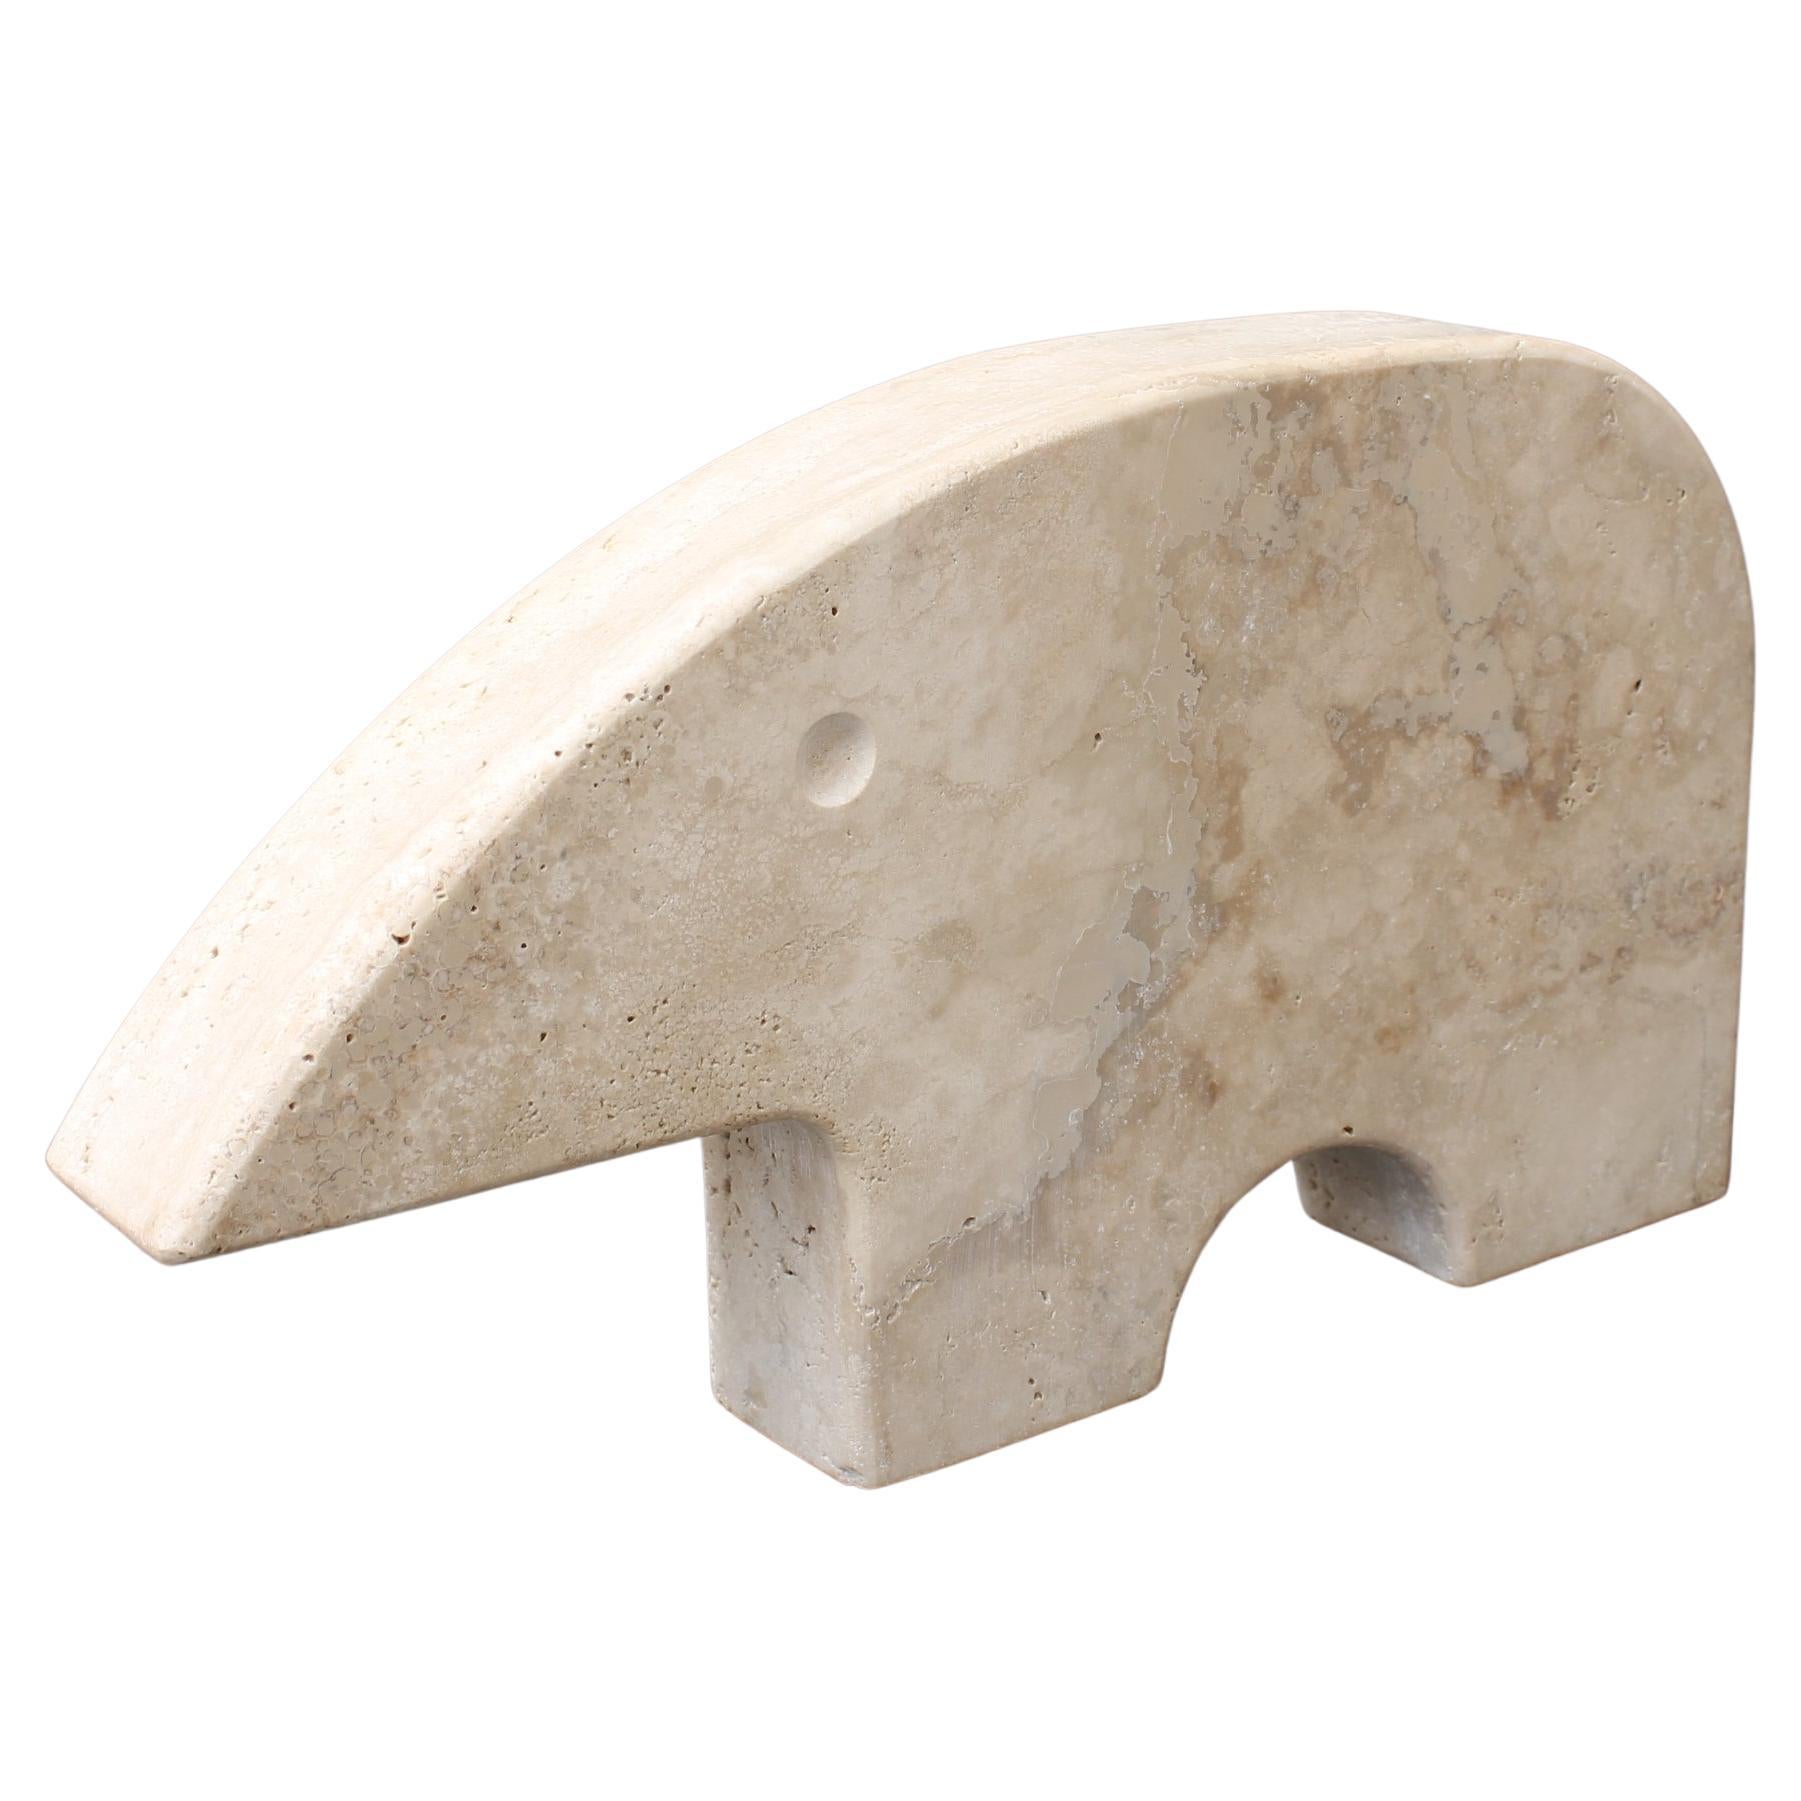 Travertine aardvark table sculpture by Mannelli Bros., Florence, Italy (circa 1970s). Joyful travertine stylised aardvark will delight art lovers and collectors. Minimalist in style with soft curves and lines. Very weighty (3.2 kg / 7.0 lbs) and